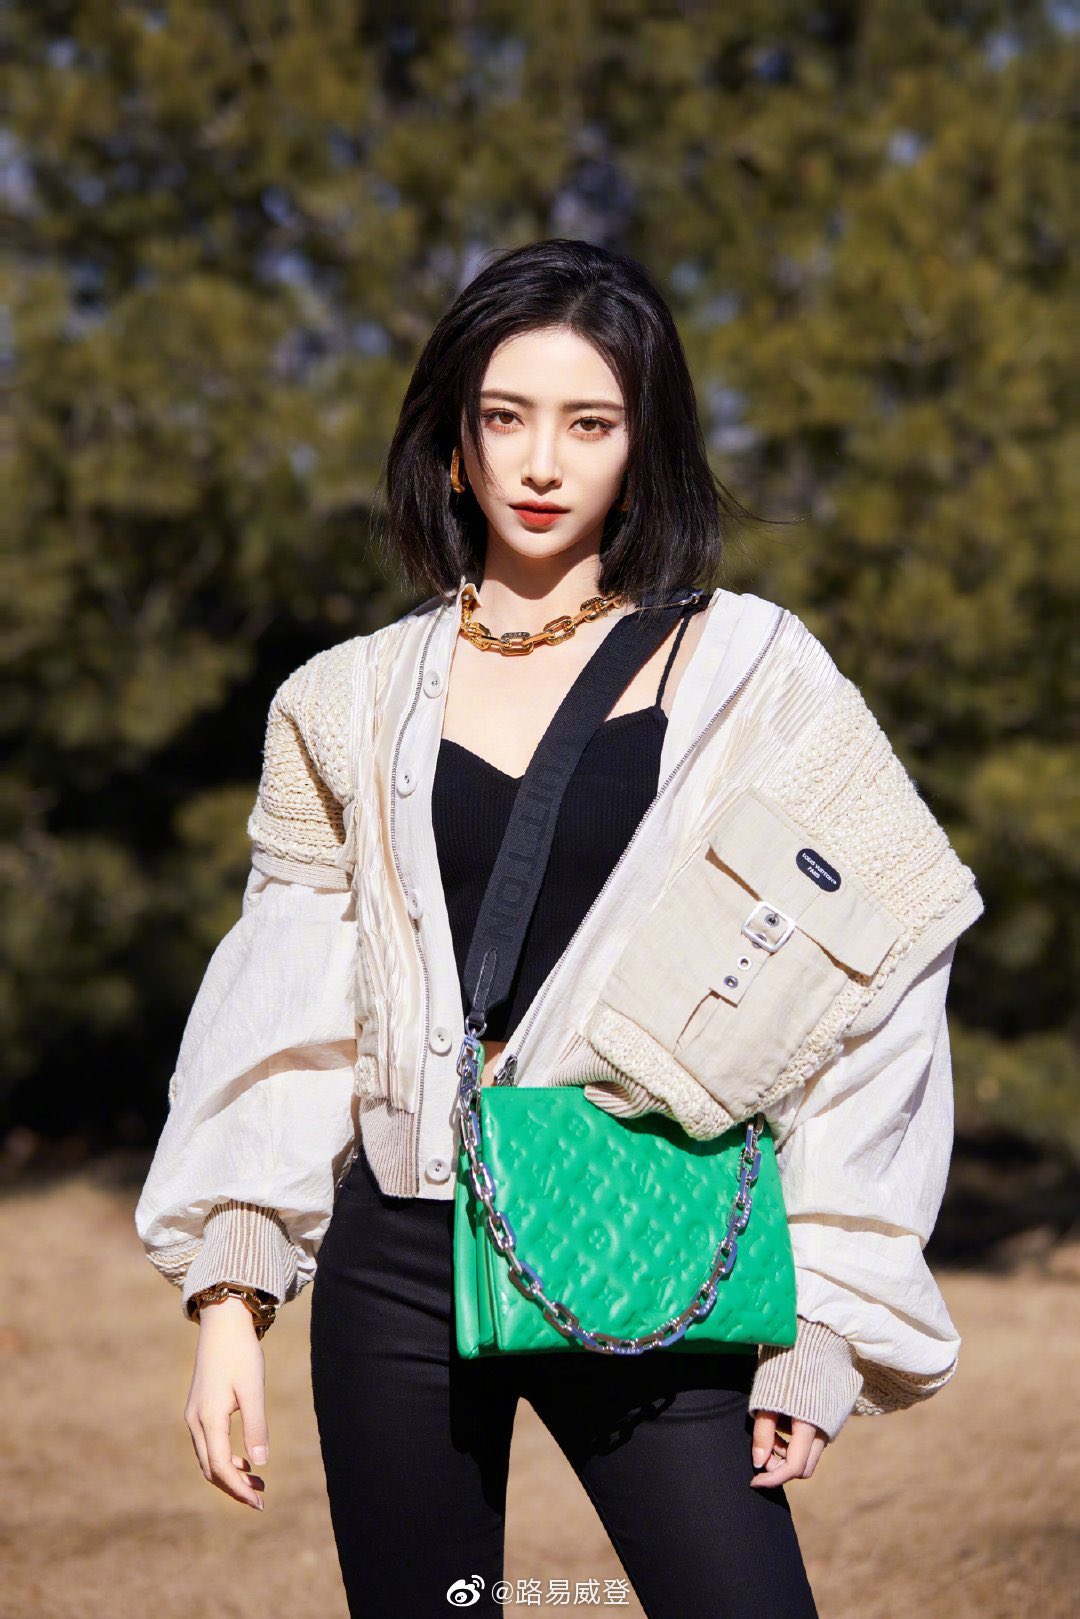 STAND BY JIAQI on X: [STYLE] Xu JiaQi x @LouisVuitton Hand bag - 2021  Spring/Summer COUSSIN Collection Jacket - 2021 Spring/Summer Collection  Bracelet - LV EDGE Necklace - LV EDGE Earrings 